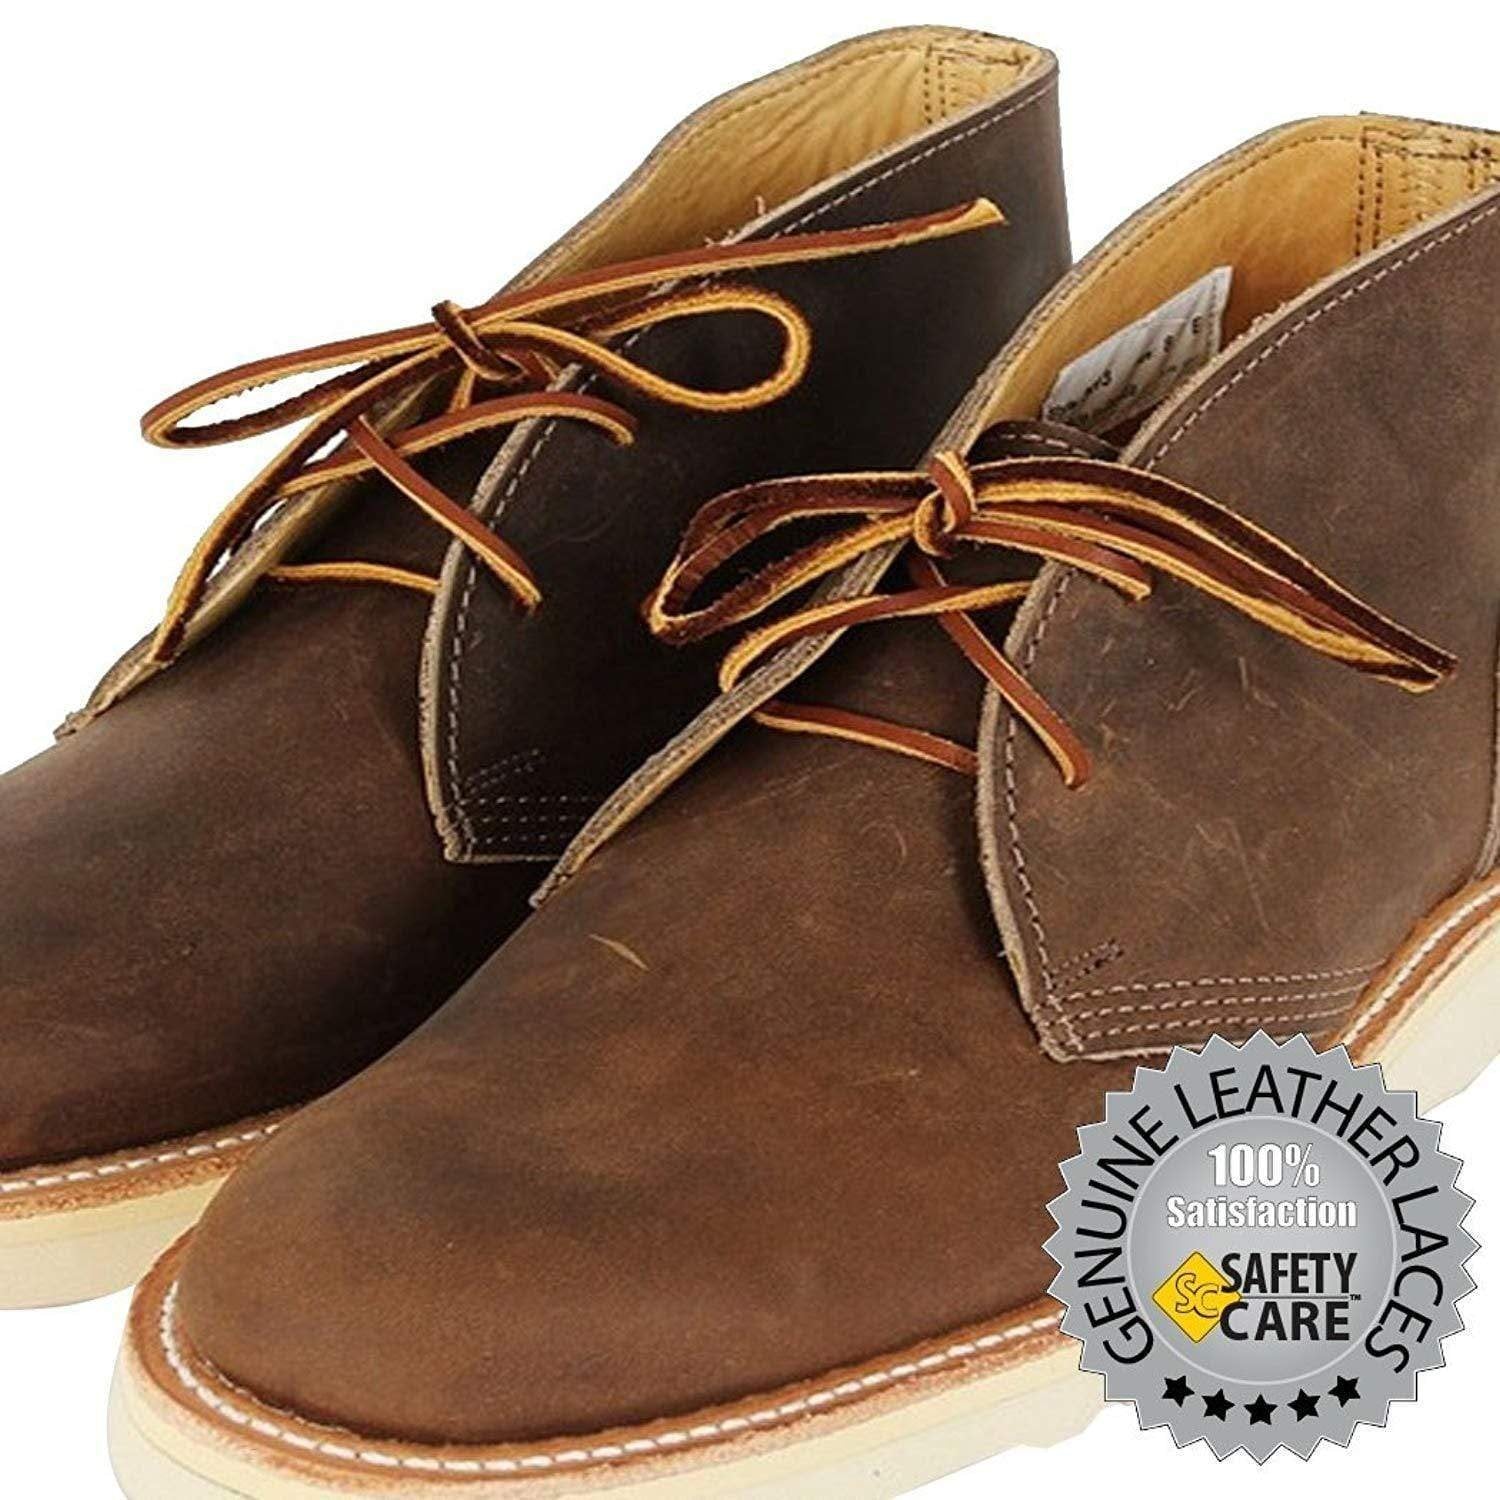 The best quality leather shoe laces guarantee safety when working